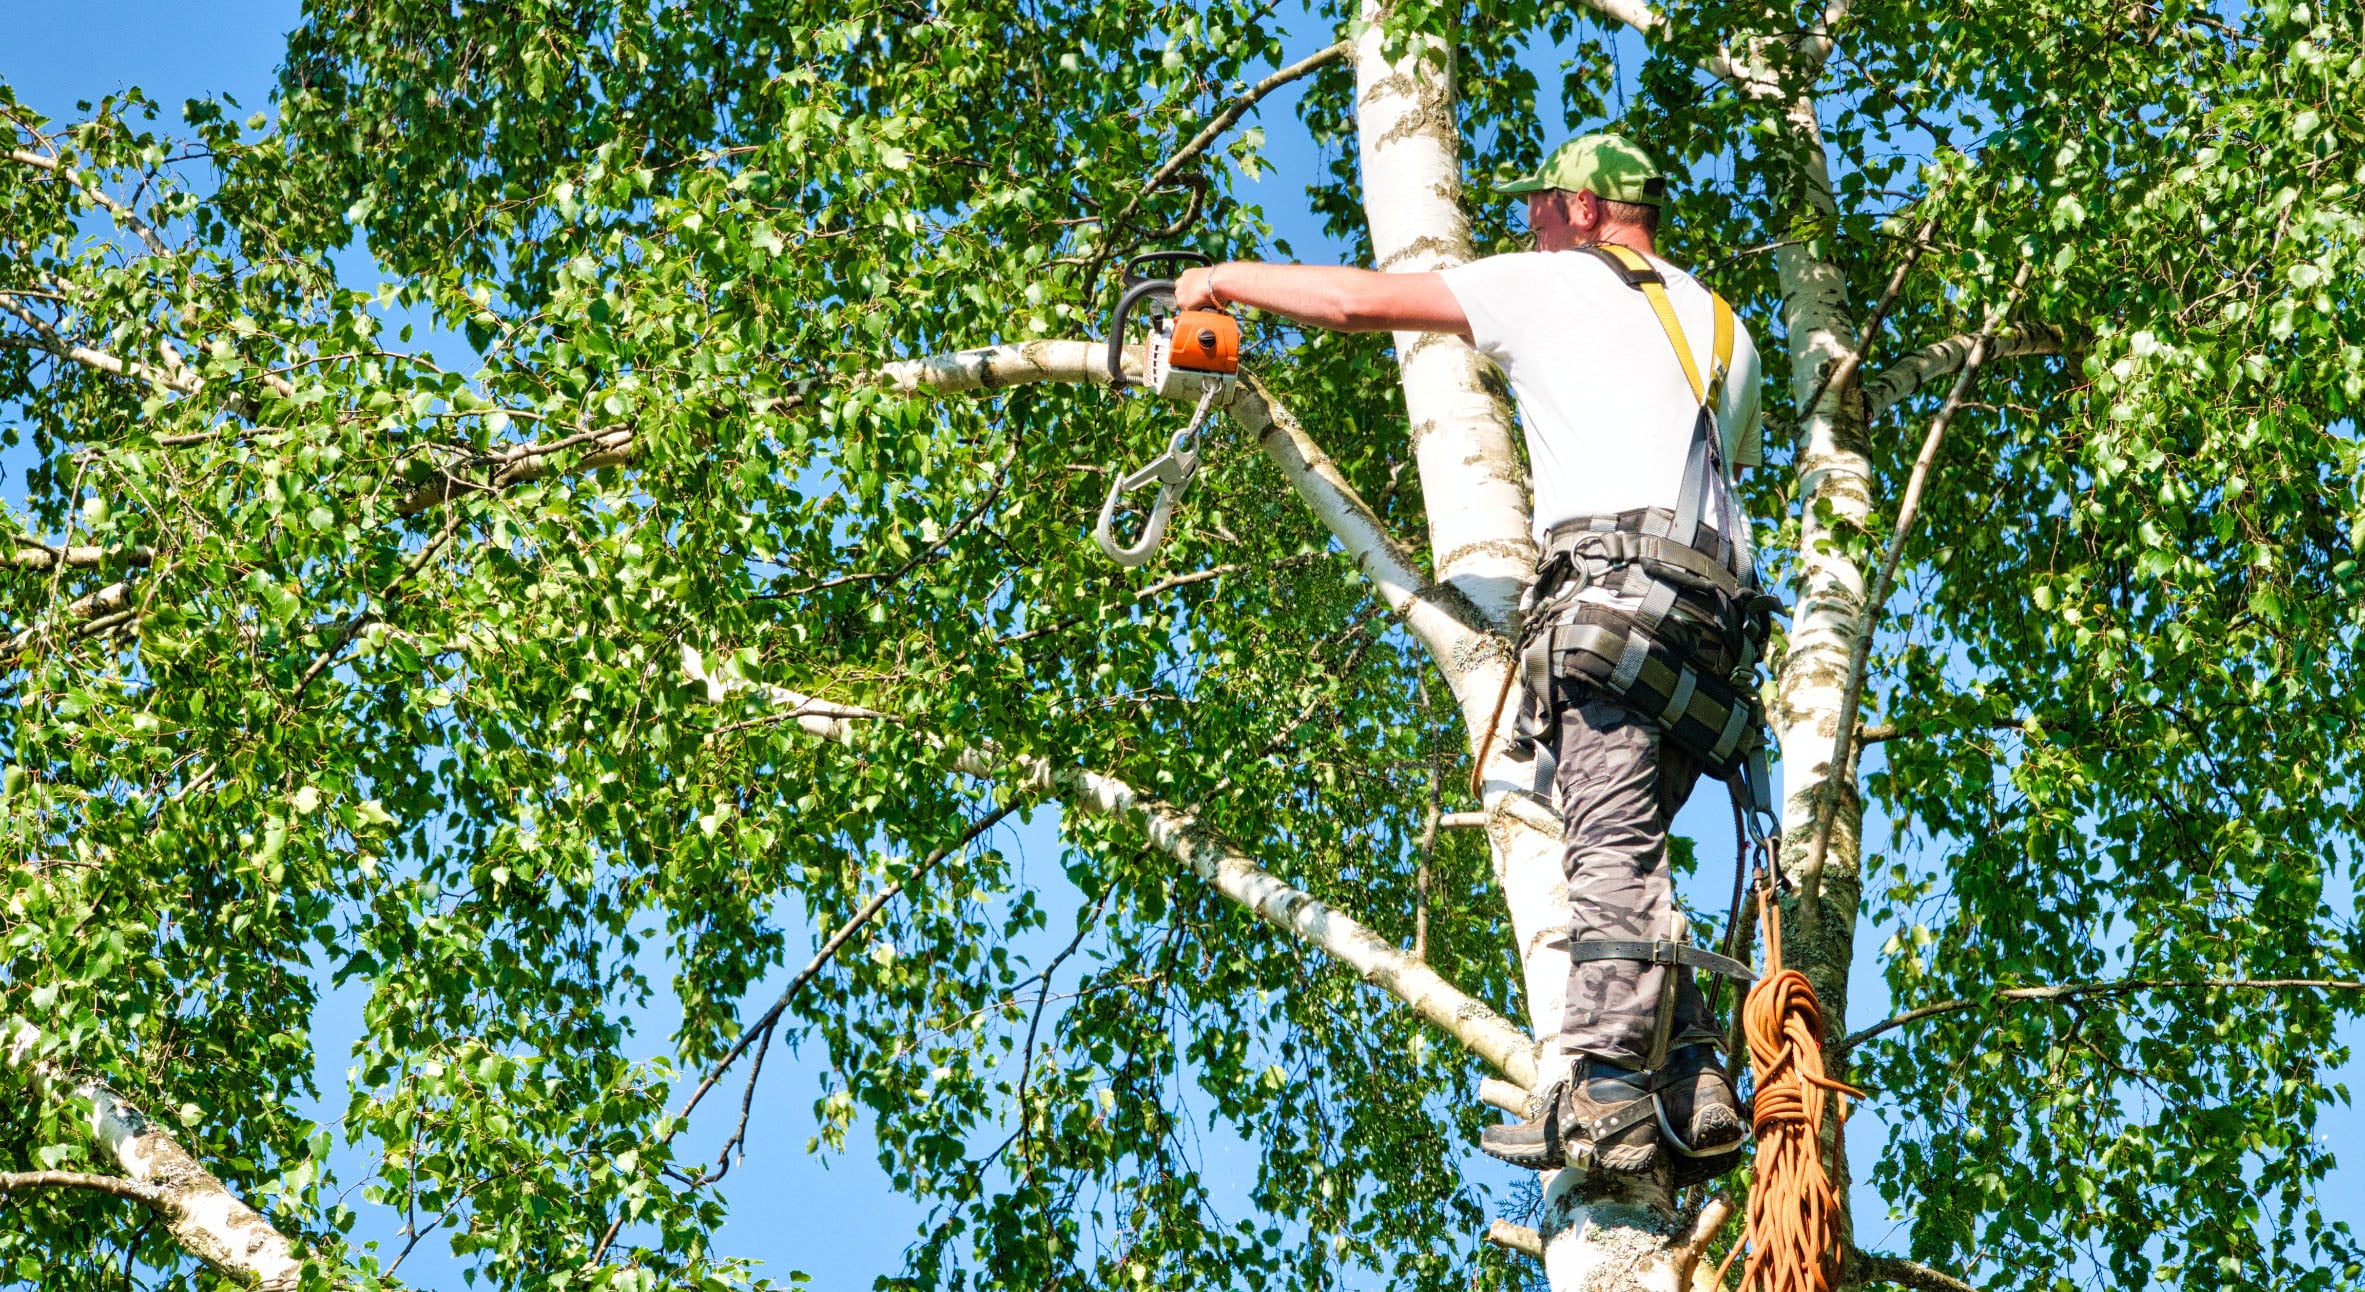 Tree care specialist trimming high up in a birch tree